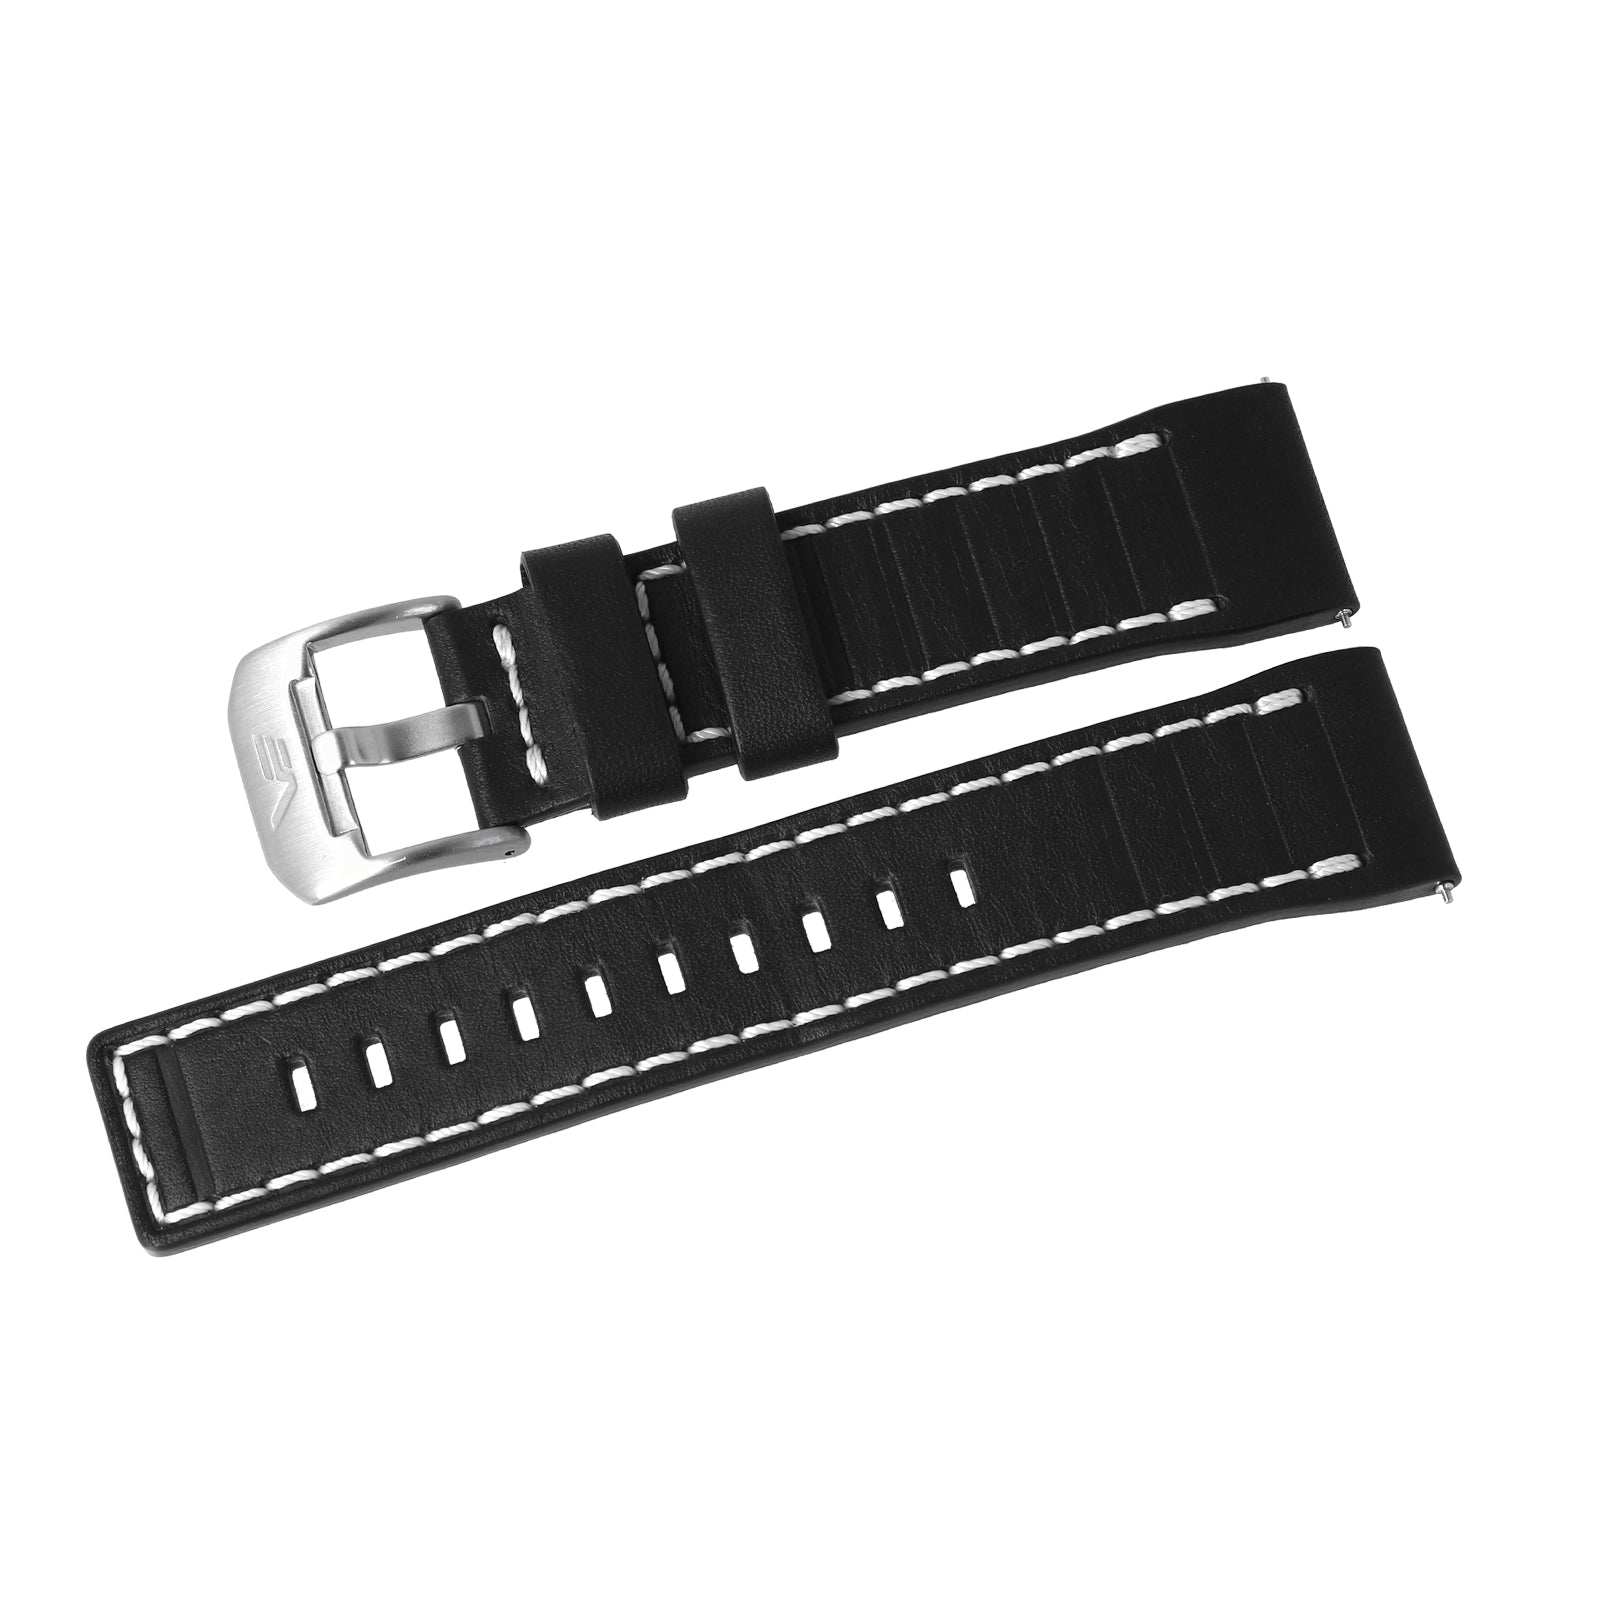 SYSTEMA PERIODICUM BLACK & WHITE LEATHER STRAP - POLISHED BUCKLE